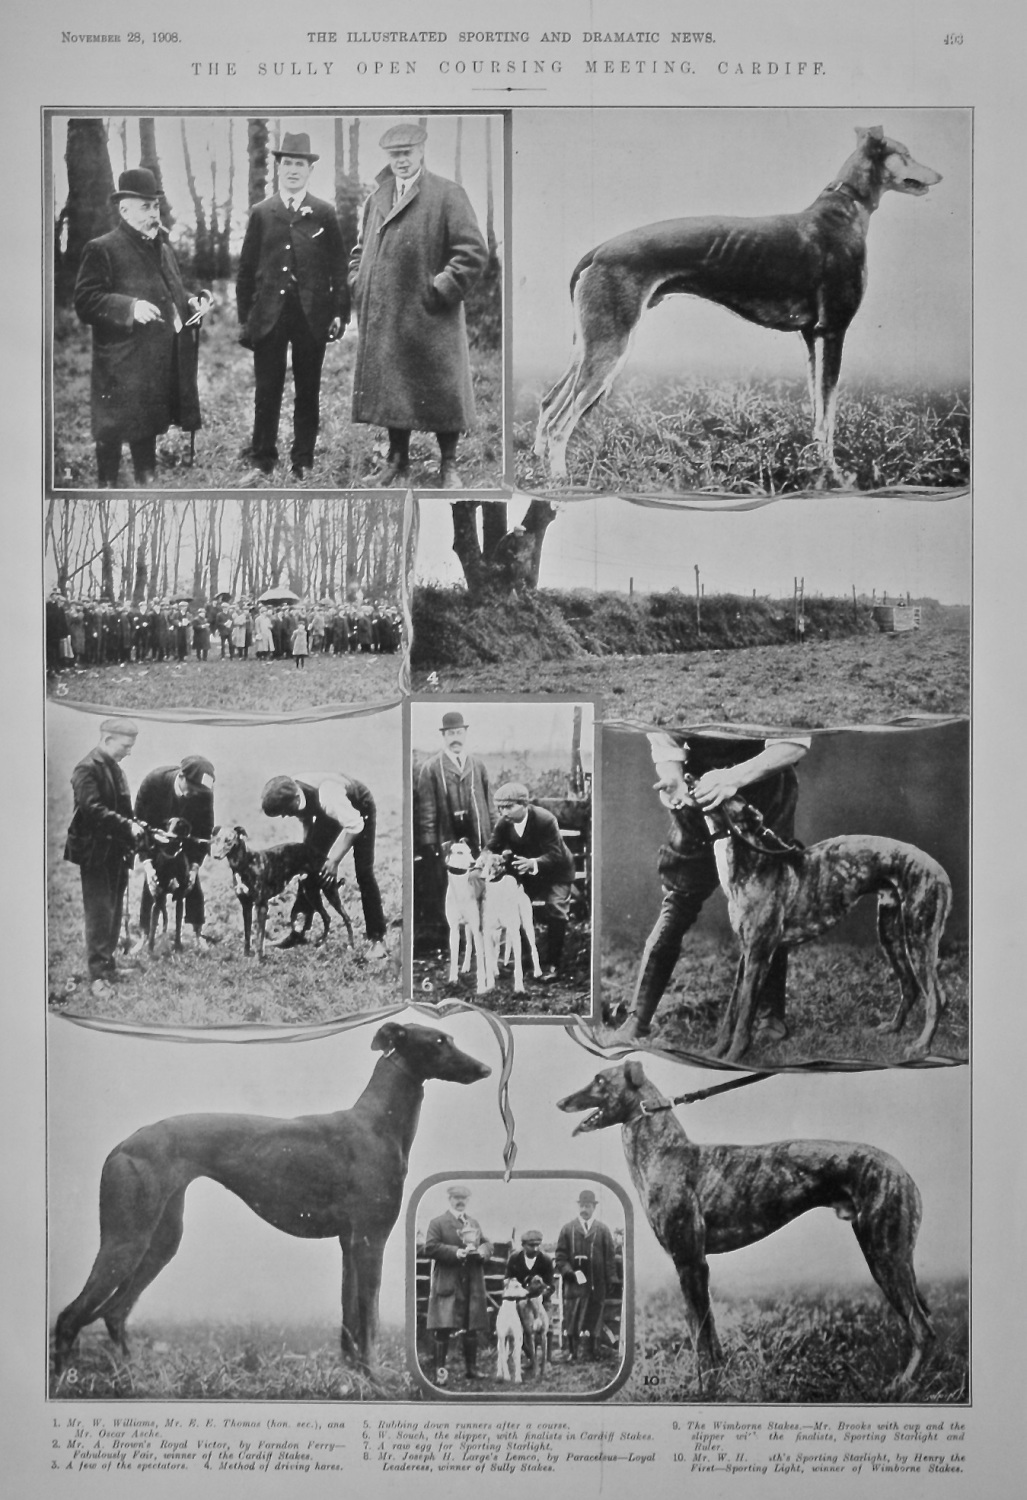 The Sully Open Coursing Meeting, Cardiff.  1908.